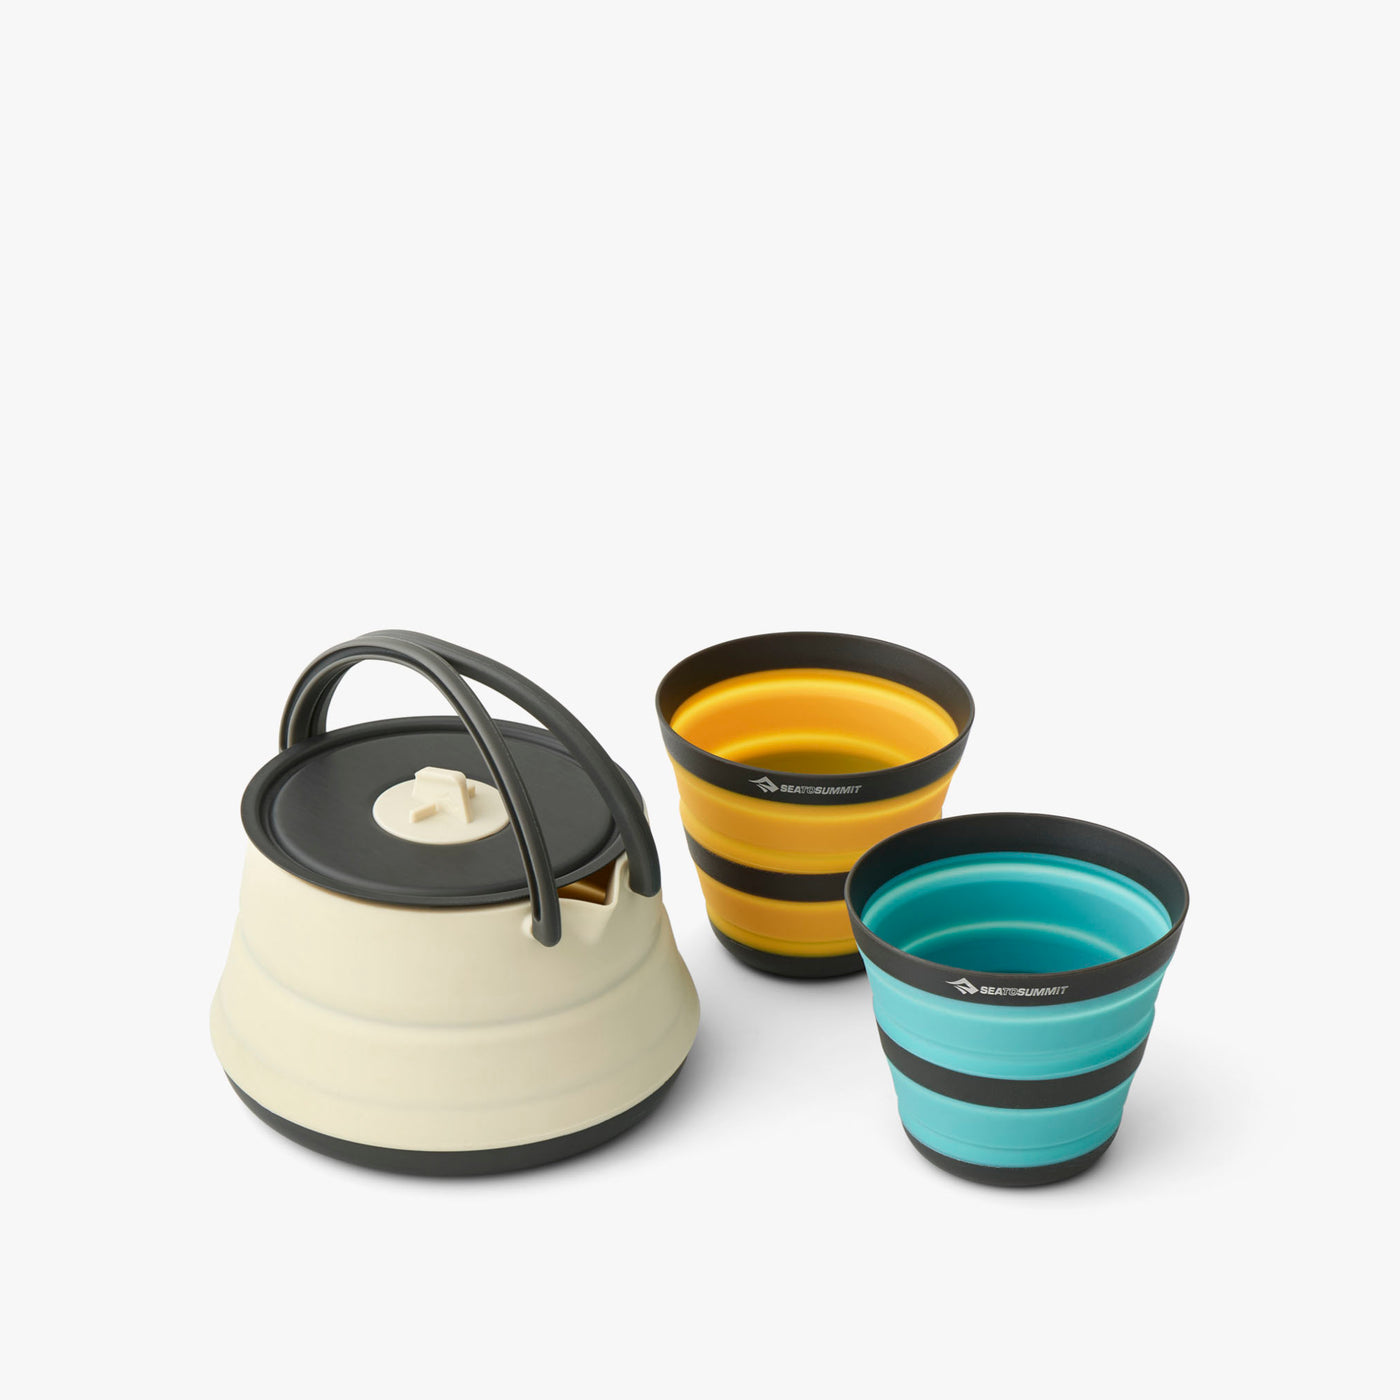 Frontier UL Collapsible Kettle Cook Set - [3 Piece]